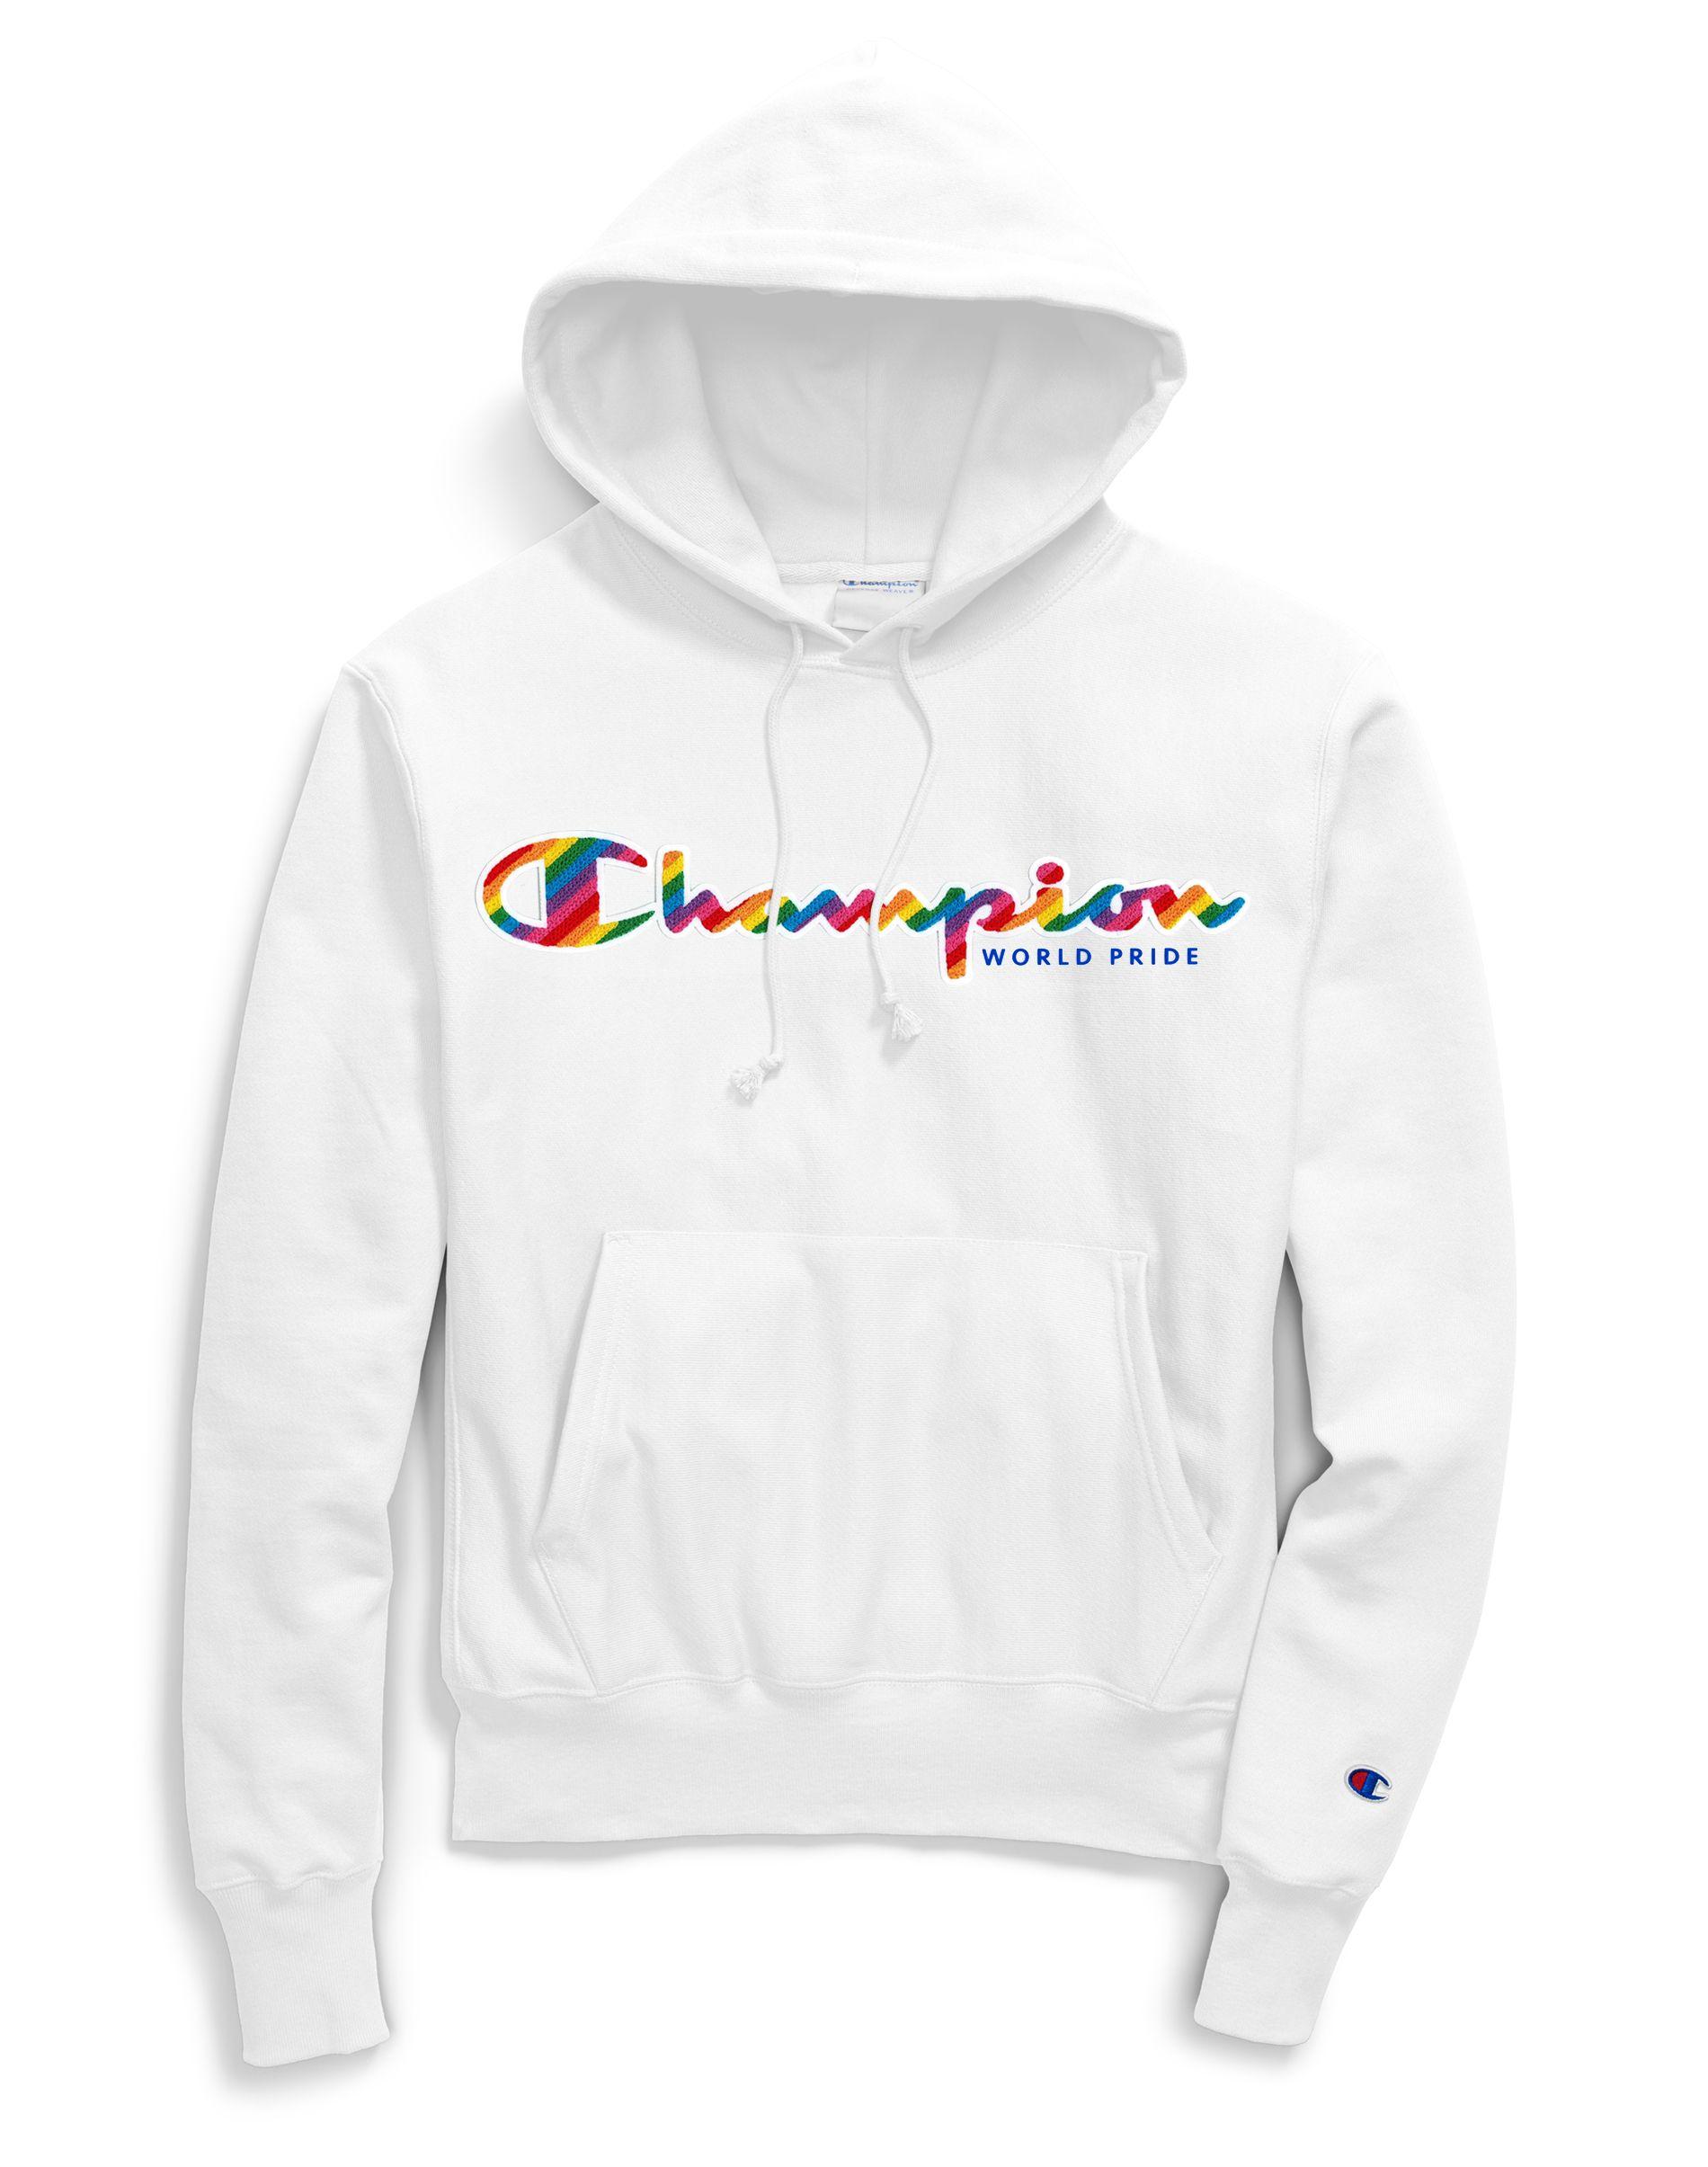 where can i find a champion hoodie